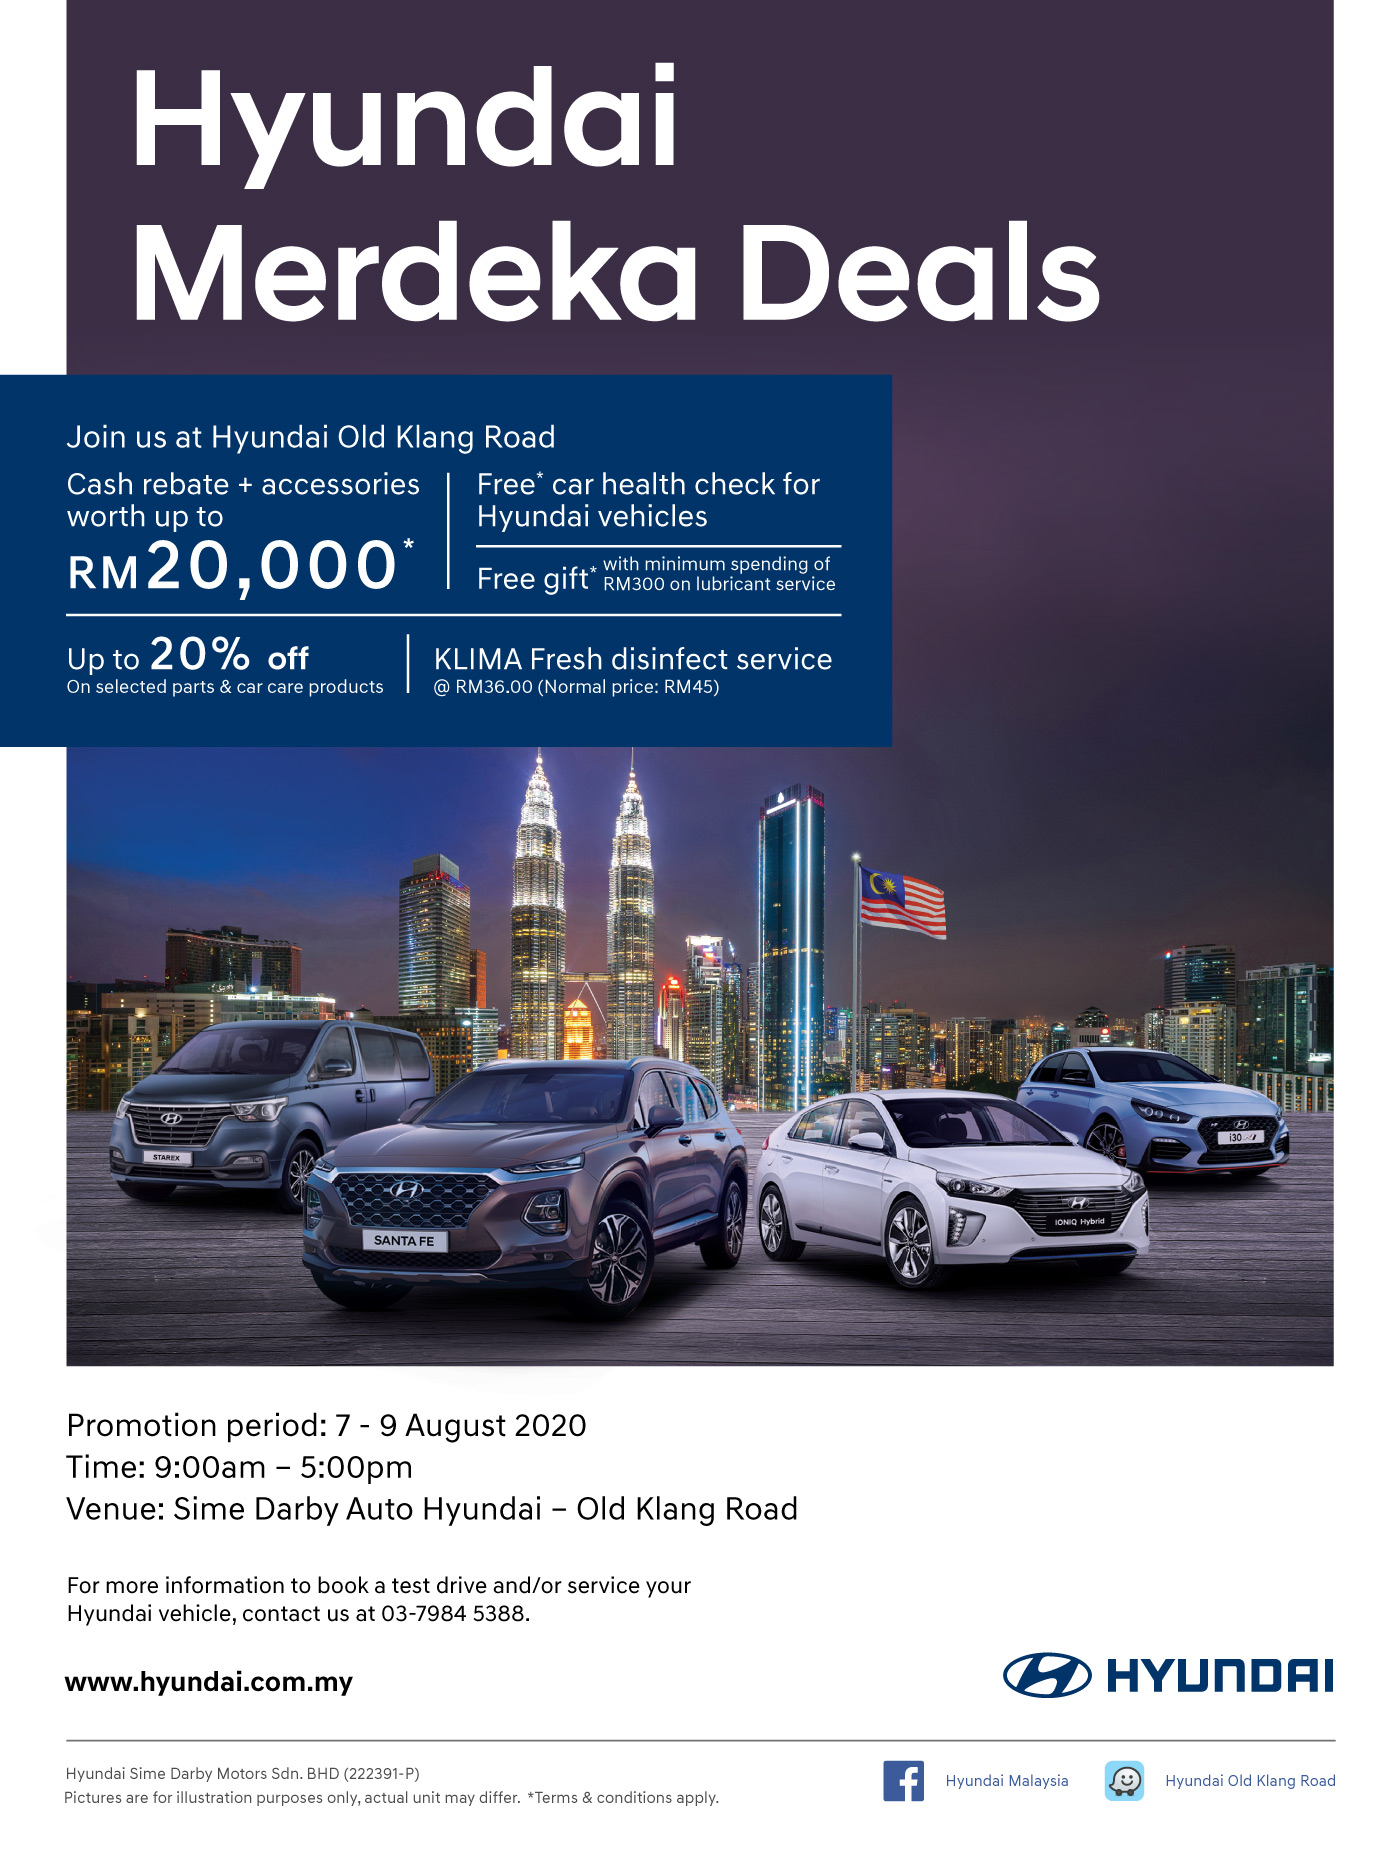 Hyundai Merdeka Deals 2020. Join us at Hyundai Old Klang Road. Cash Rebate + accessories worth up to RM 20,000*. Free* Car Health check for Hyundai vehicles. KLIMA Fresh disinfect service. | Promotion Period : 7-9 August 2020 Time : 9am - 5pm | Venue : Sime Darby Auto Hyundai - Old Klang Road